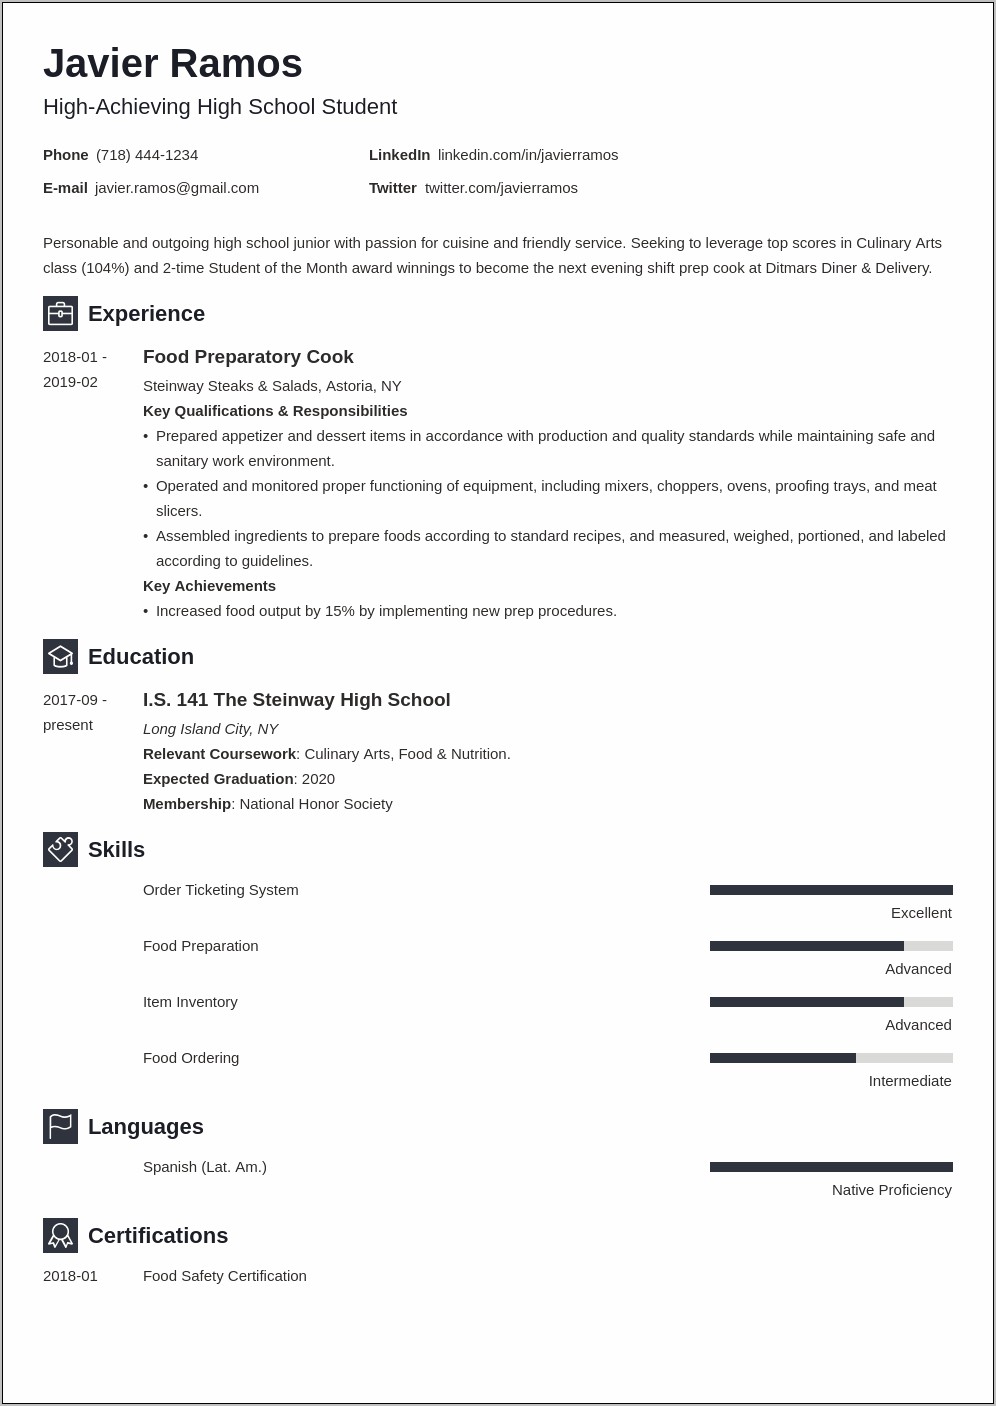 Resume Wizard For High School Students